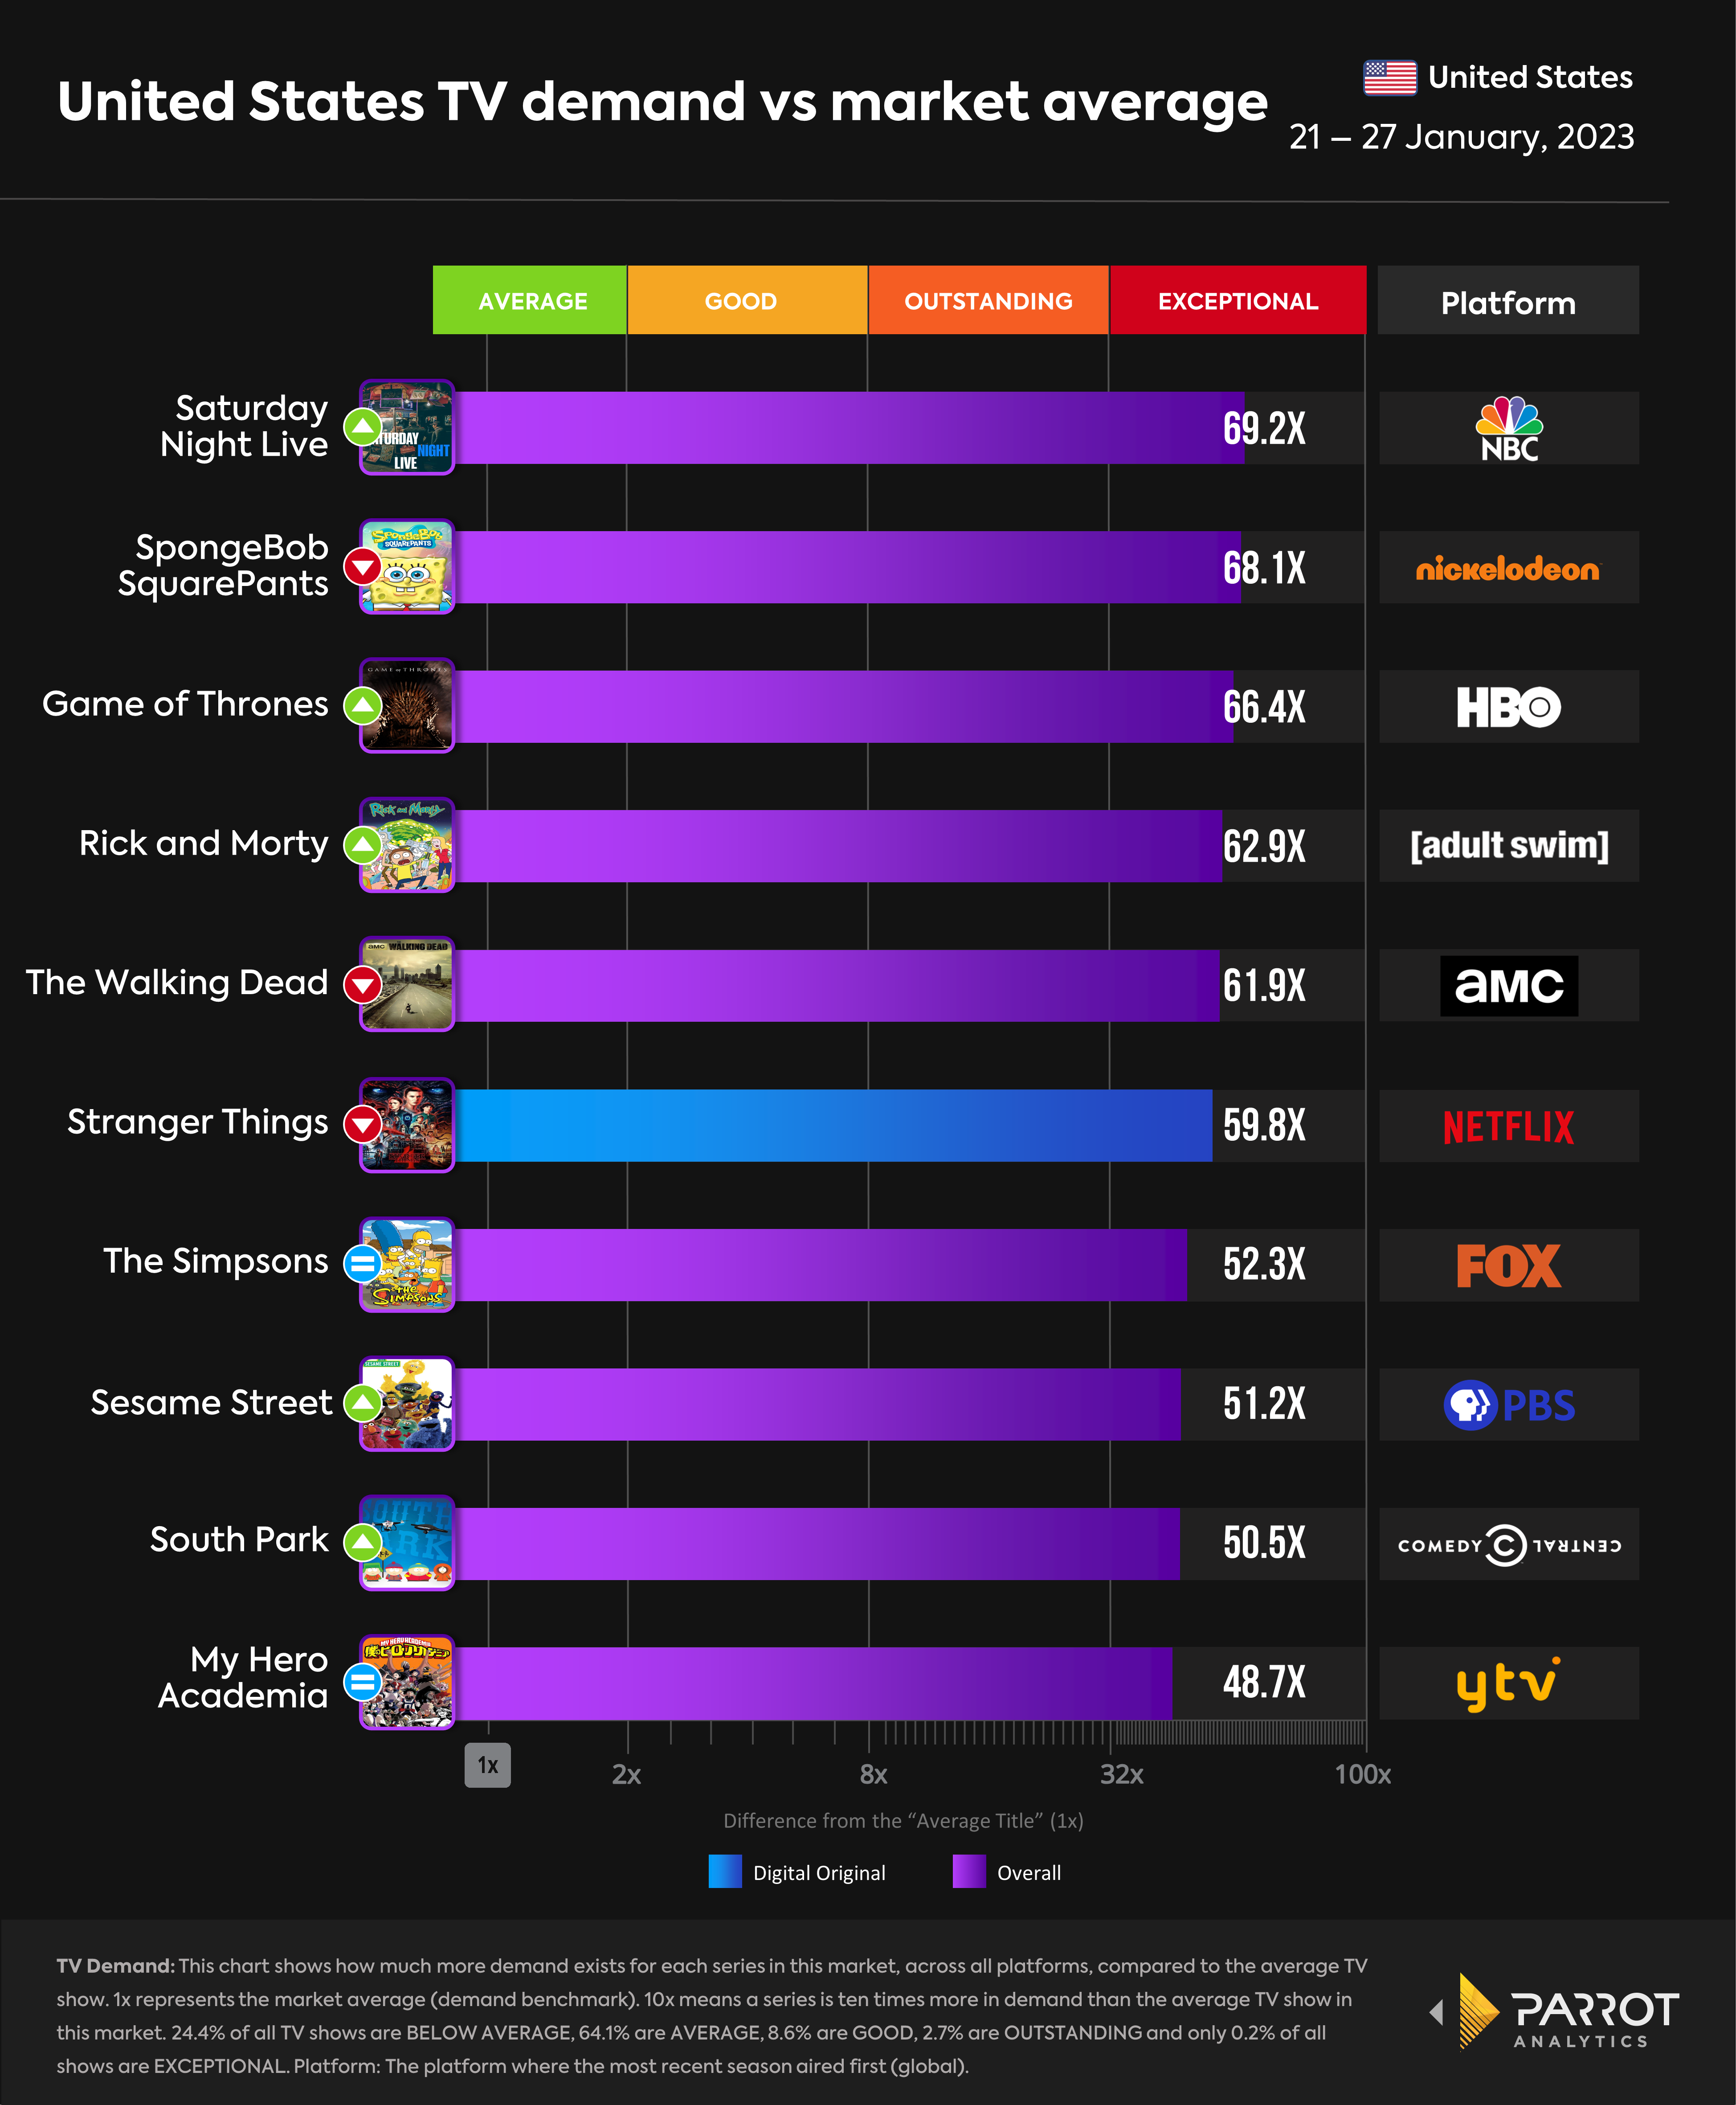 mediaplay_top10_all_series_1.30.23.png